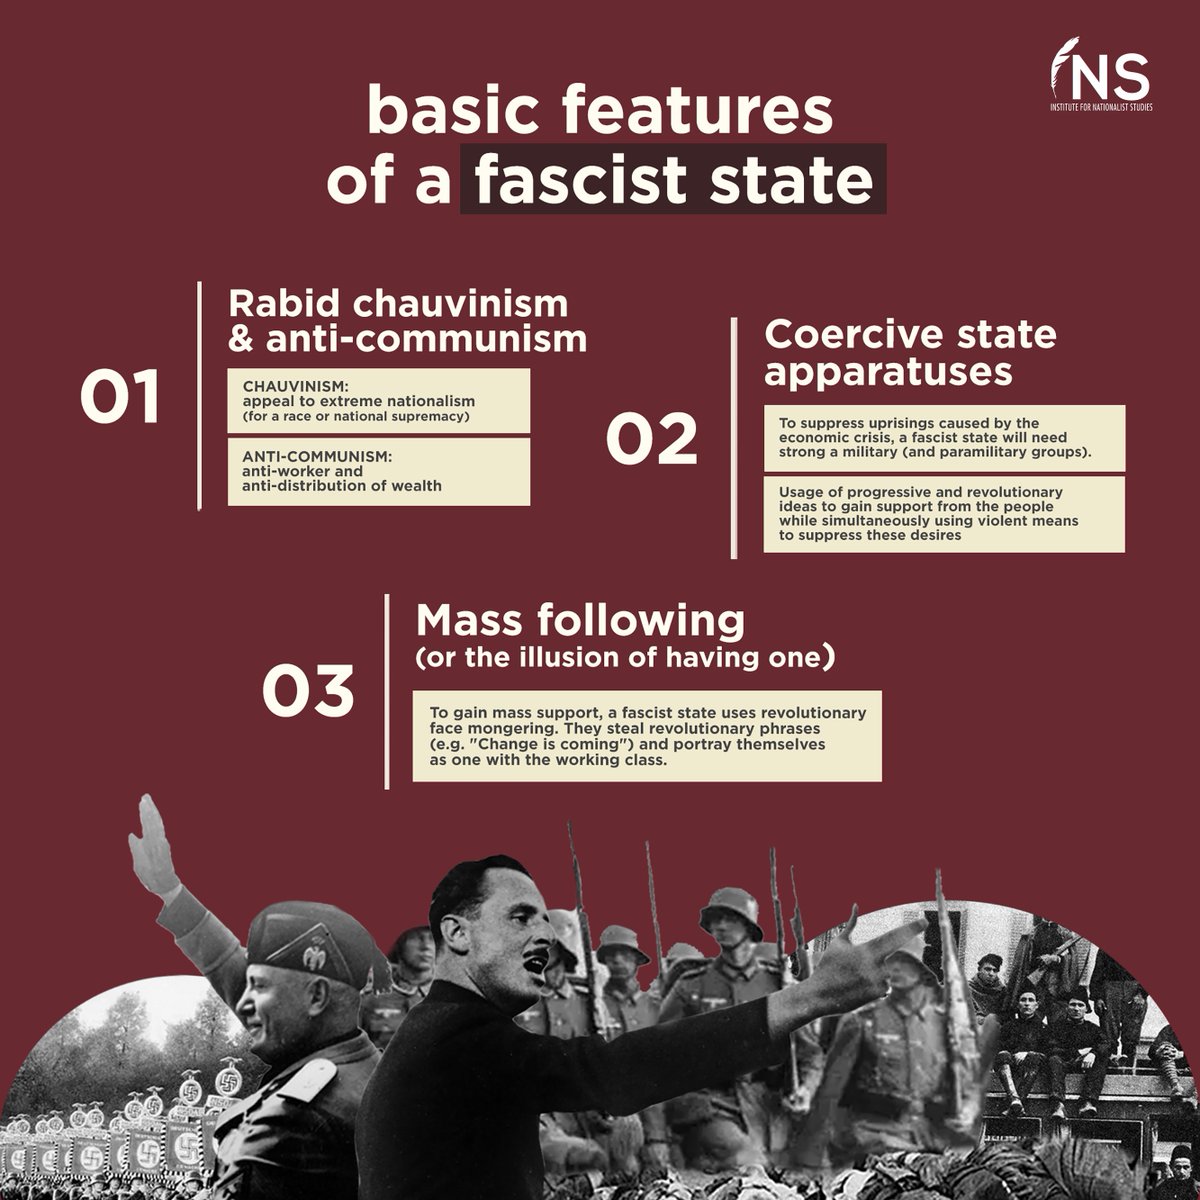 [THREAD]Apparently, nowadays, many of us indiscriminately use the word "fascism" to describe a political action that promotes a dictatorial regime. Underneath these brutalities is a system that is exclusionary and monolithic. But what really is fascism?(1/2)